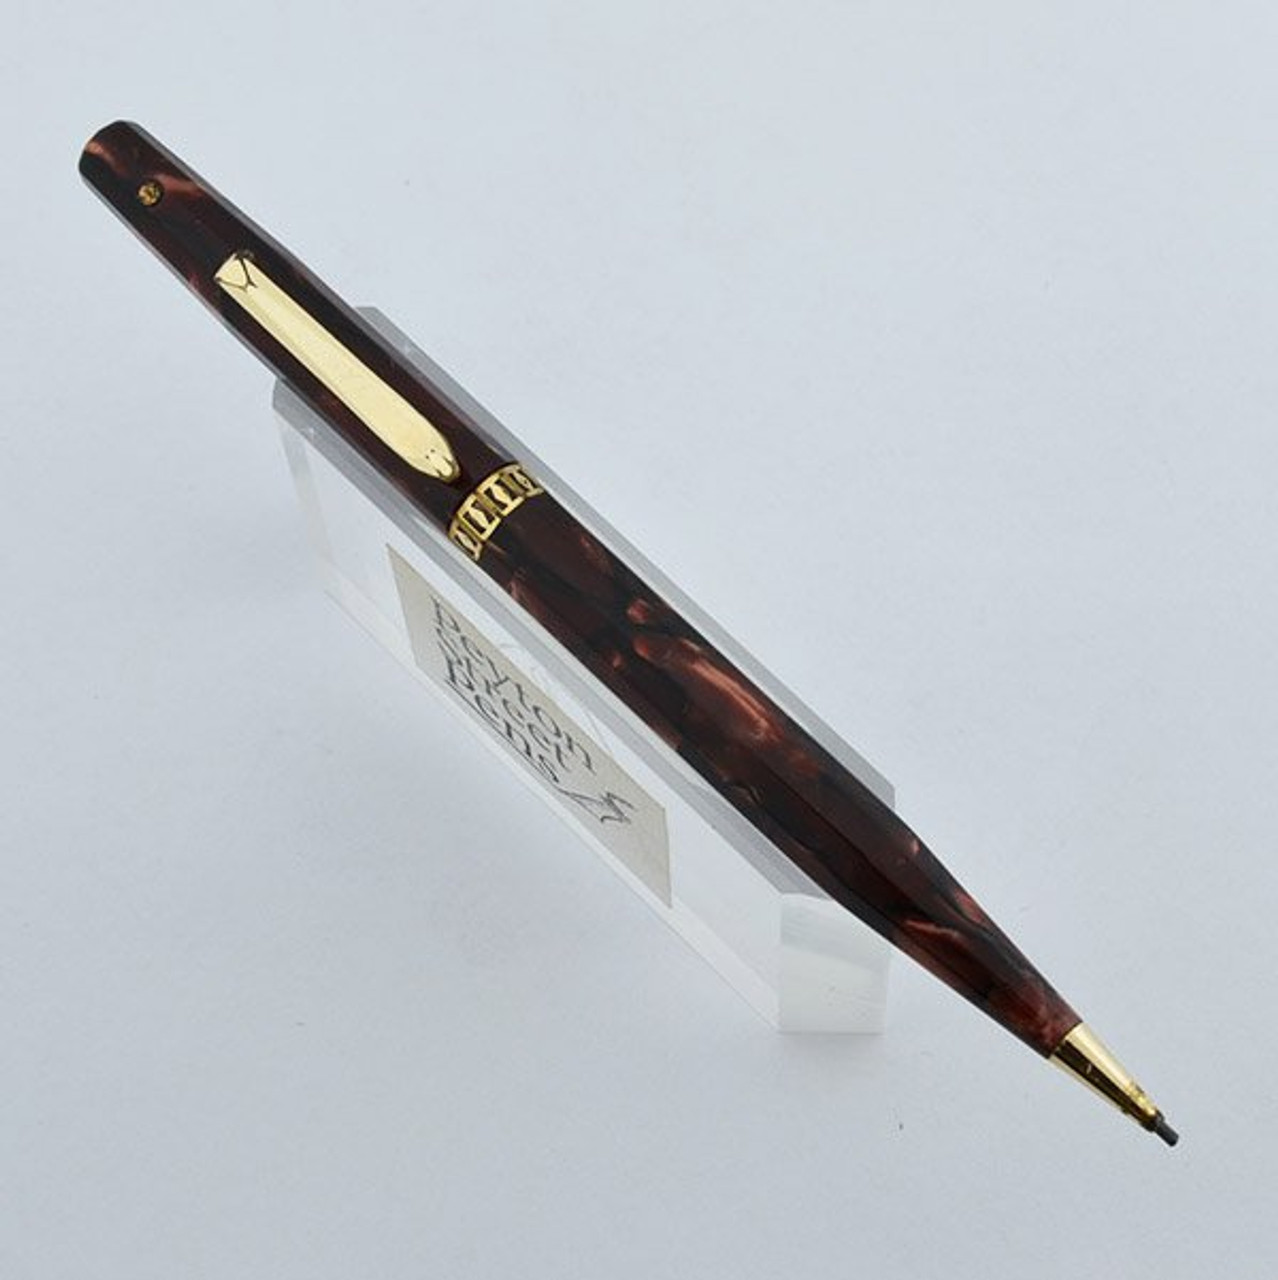 Wahl Doric Mechanical Pencil - Gold Seal, "Morocco," 5-3/8" (Very Nice, Works Well)